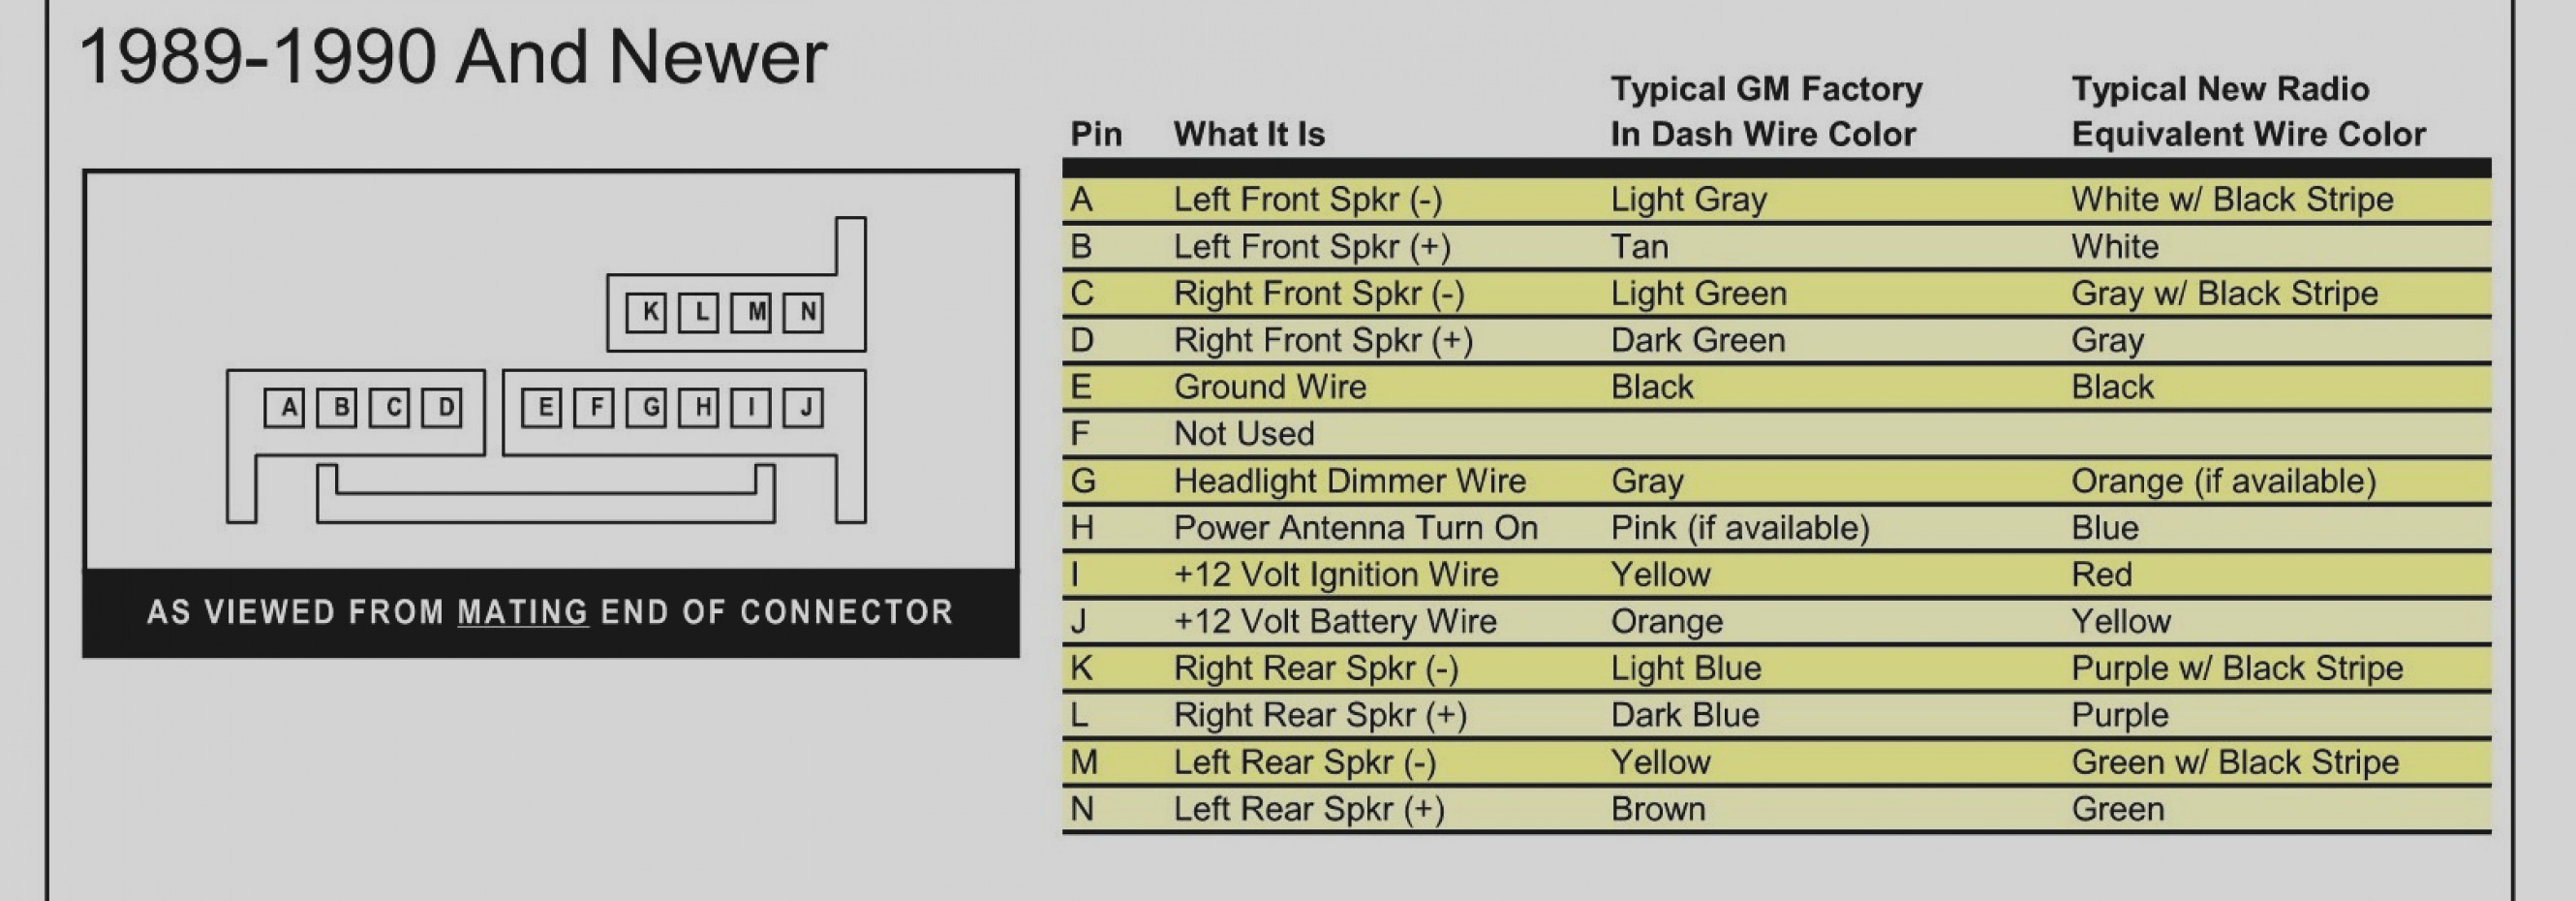 2002 Chevy Tahoe Radio Wiring Diagram Lovely 2 | Hastalavista - 2002 Chevy Tahoe Radio Wiring Diagram